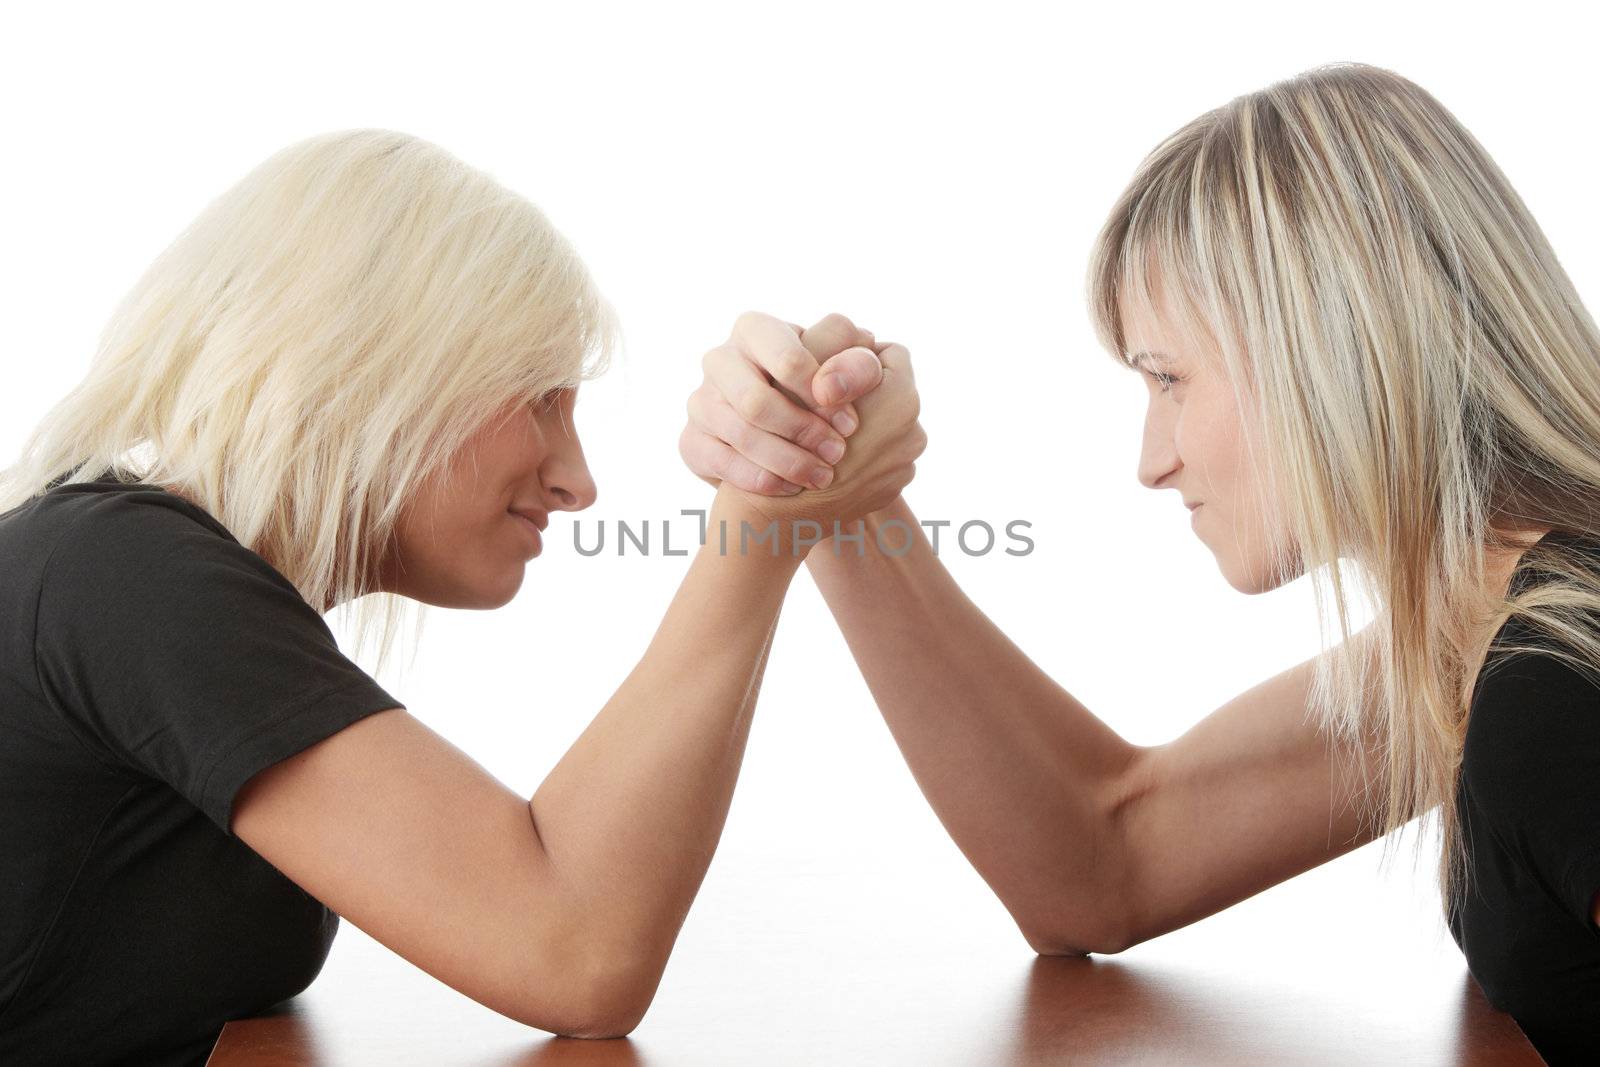 Two woman competition by BDS